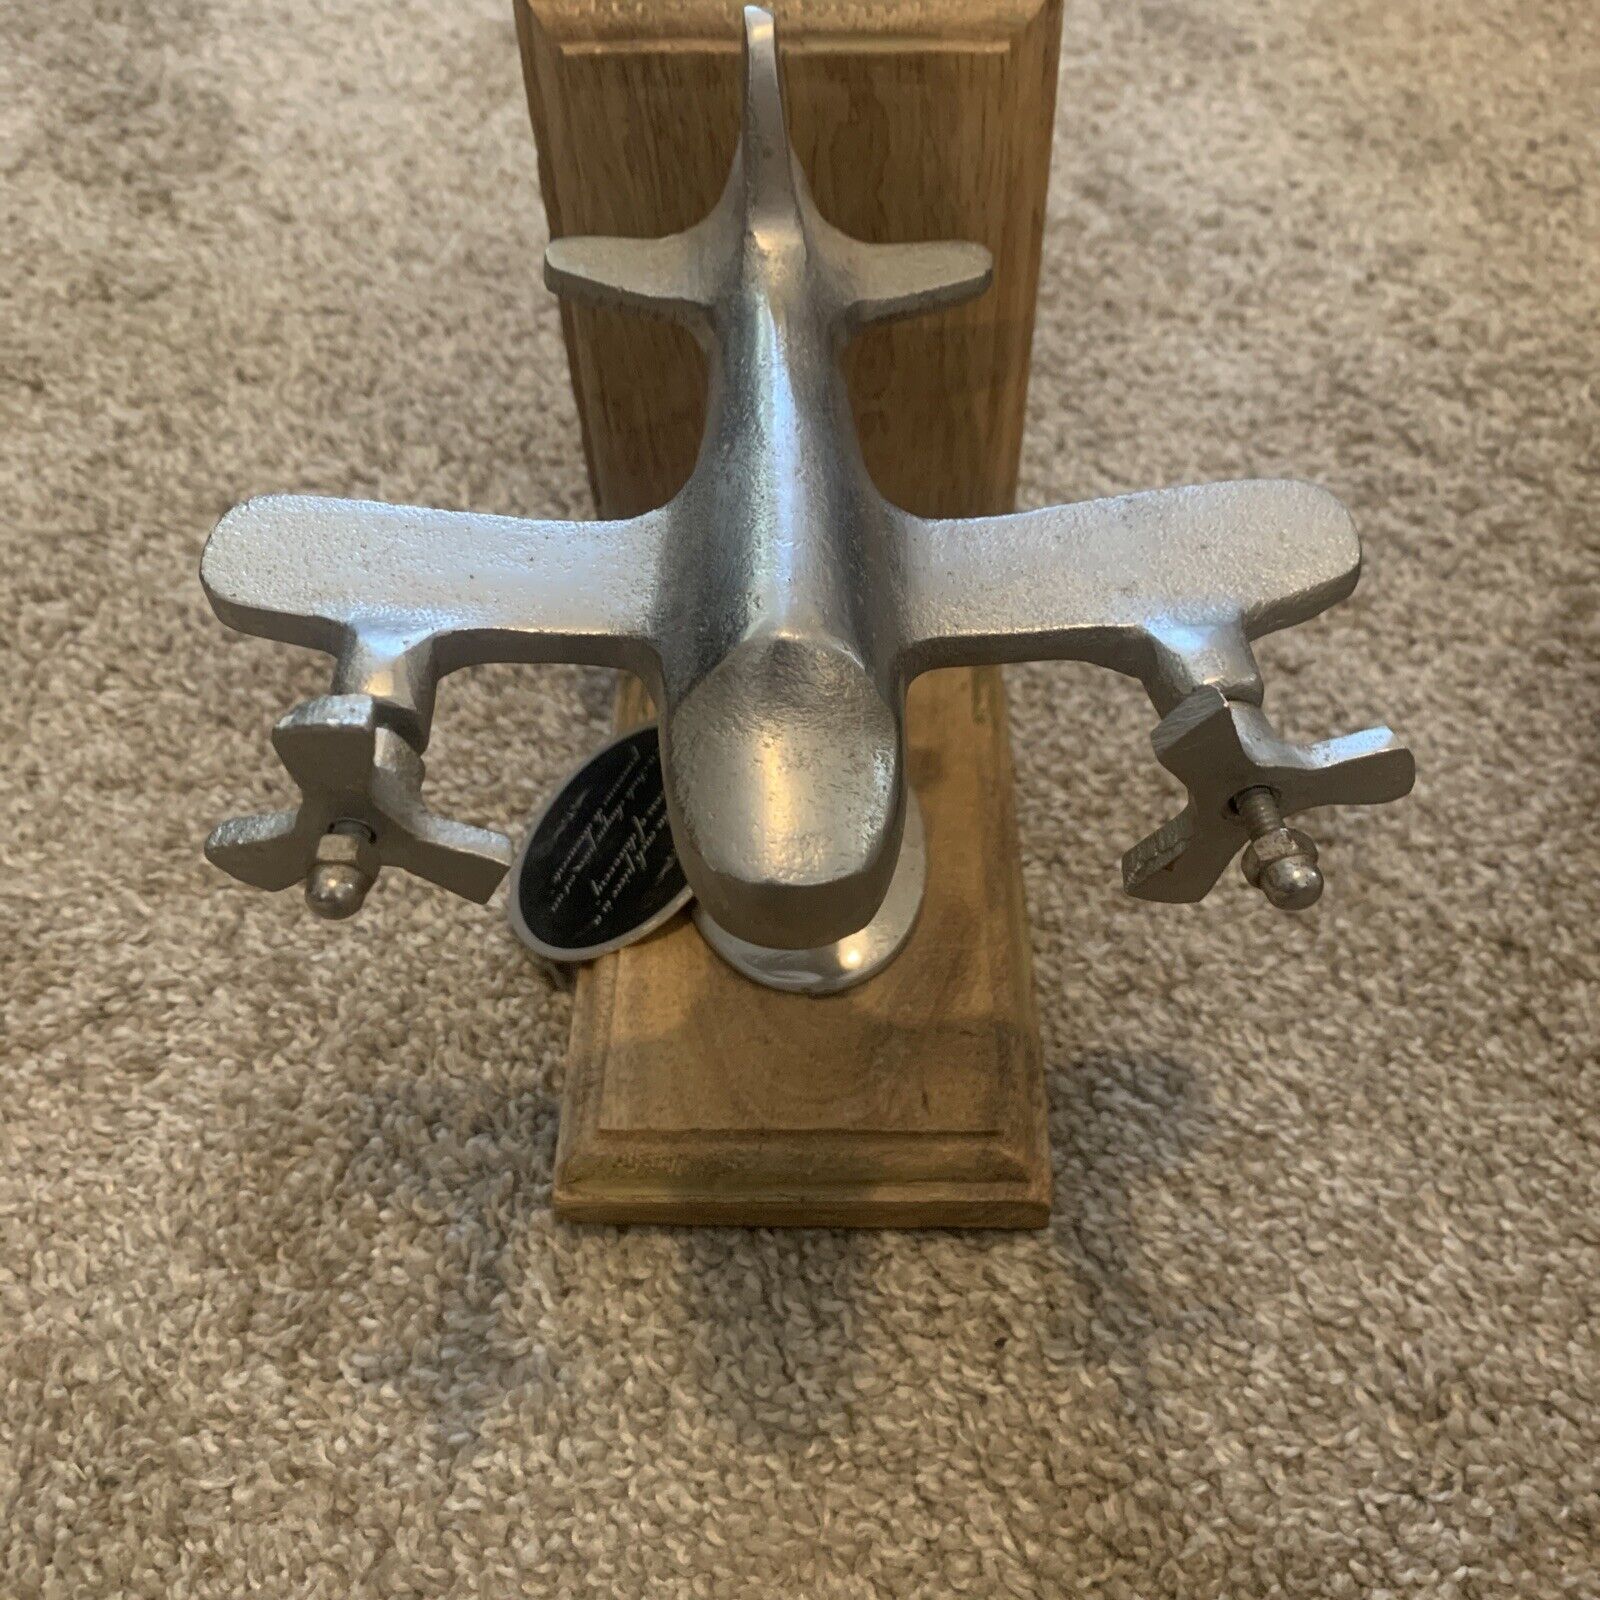 Vintage Metal Model Airplane with Moving Propellers - Collectible Display